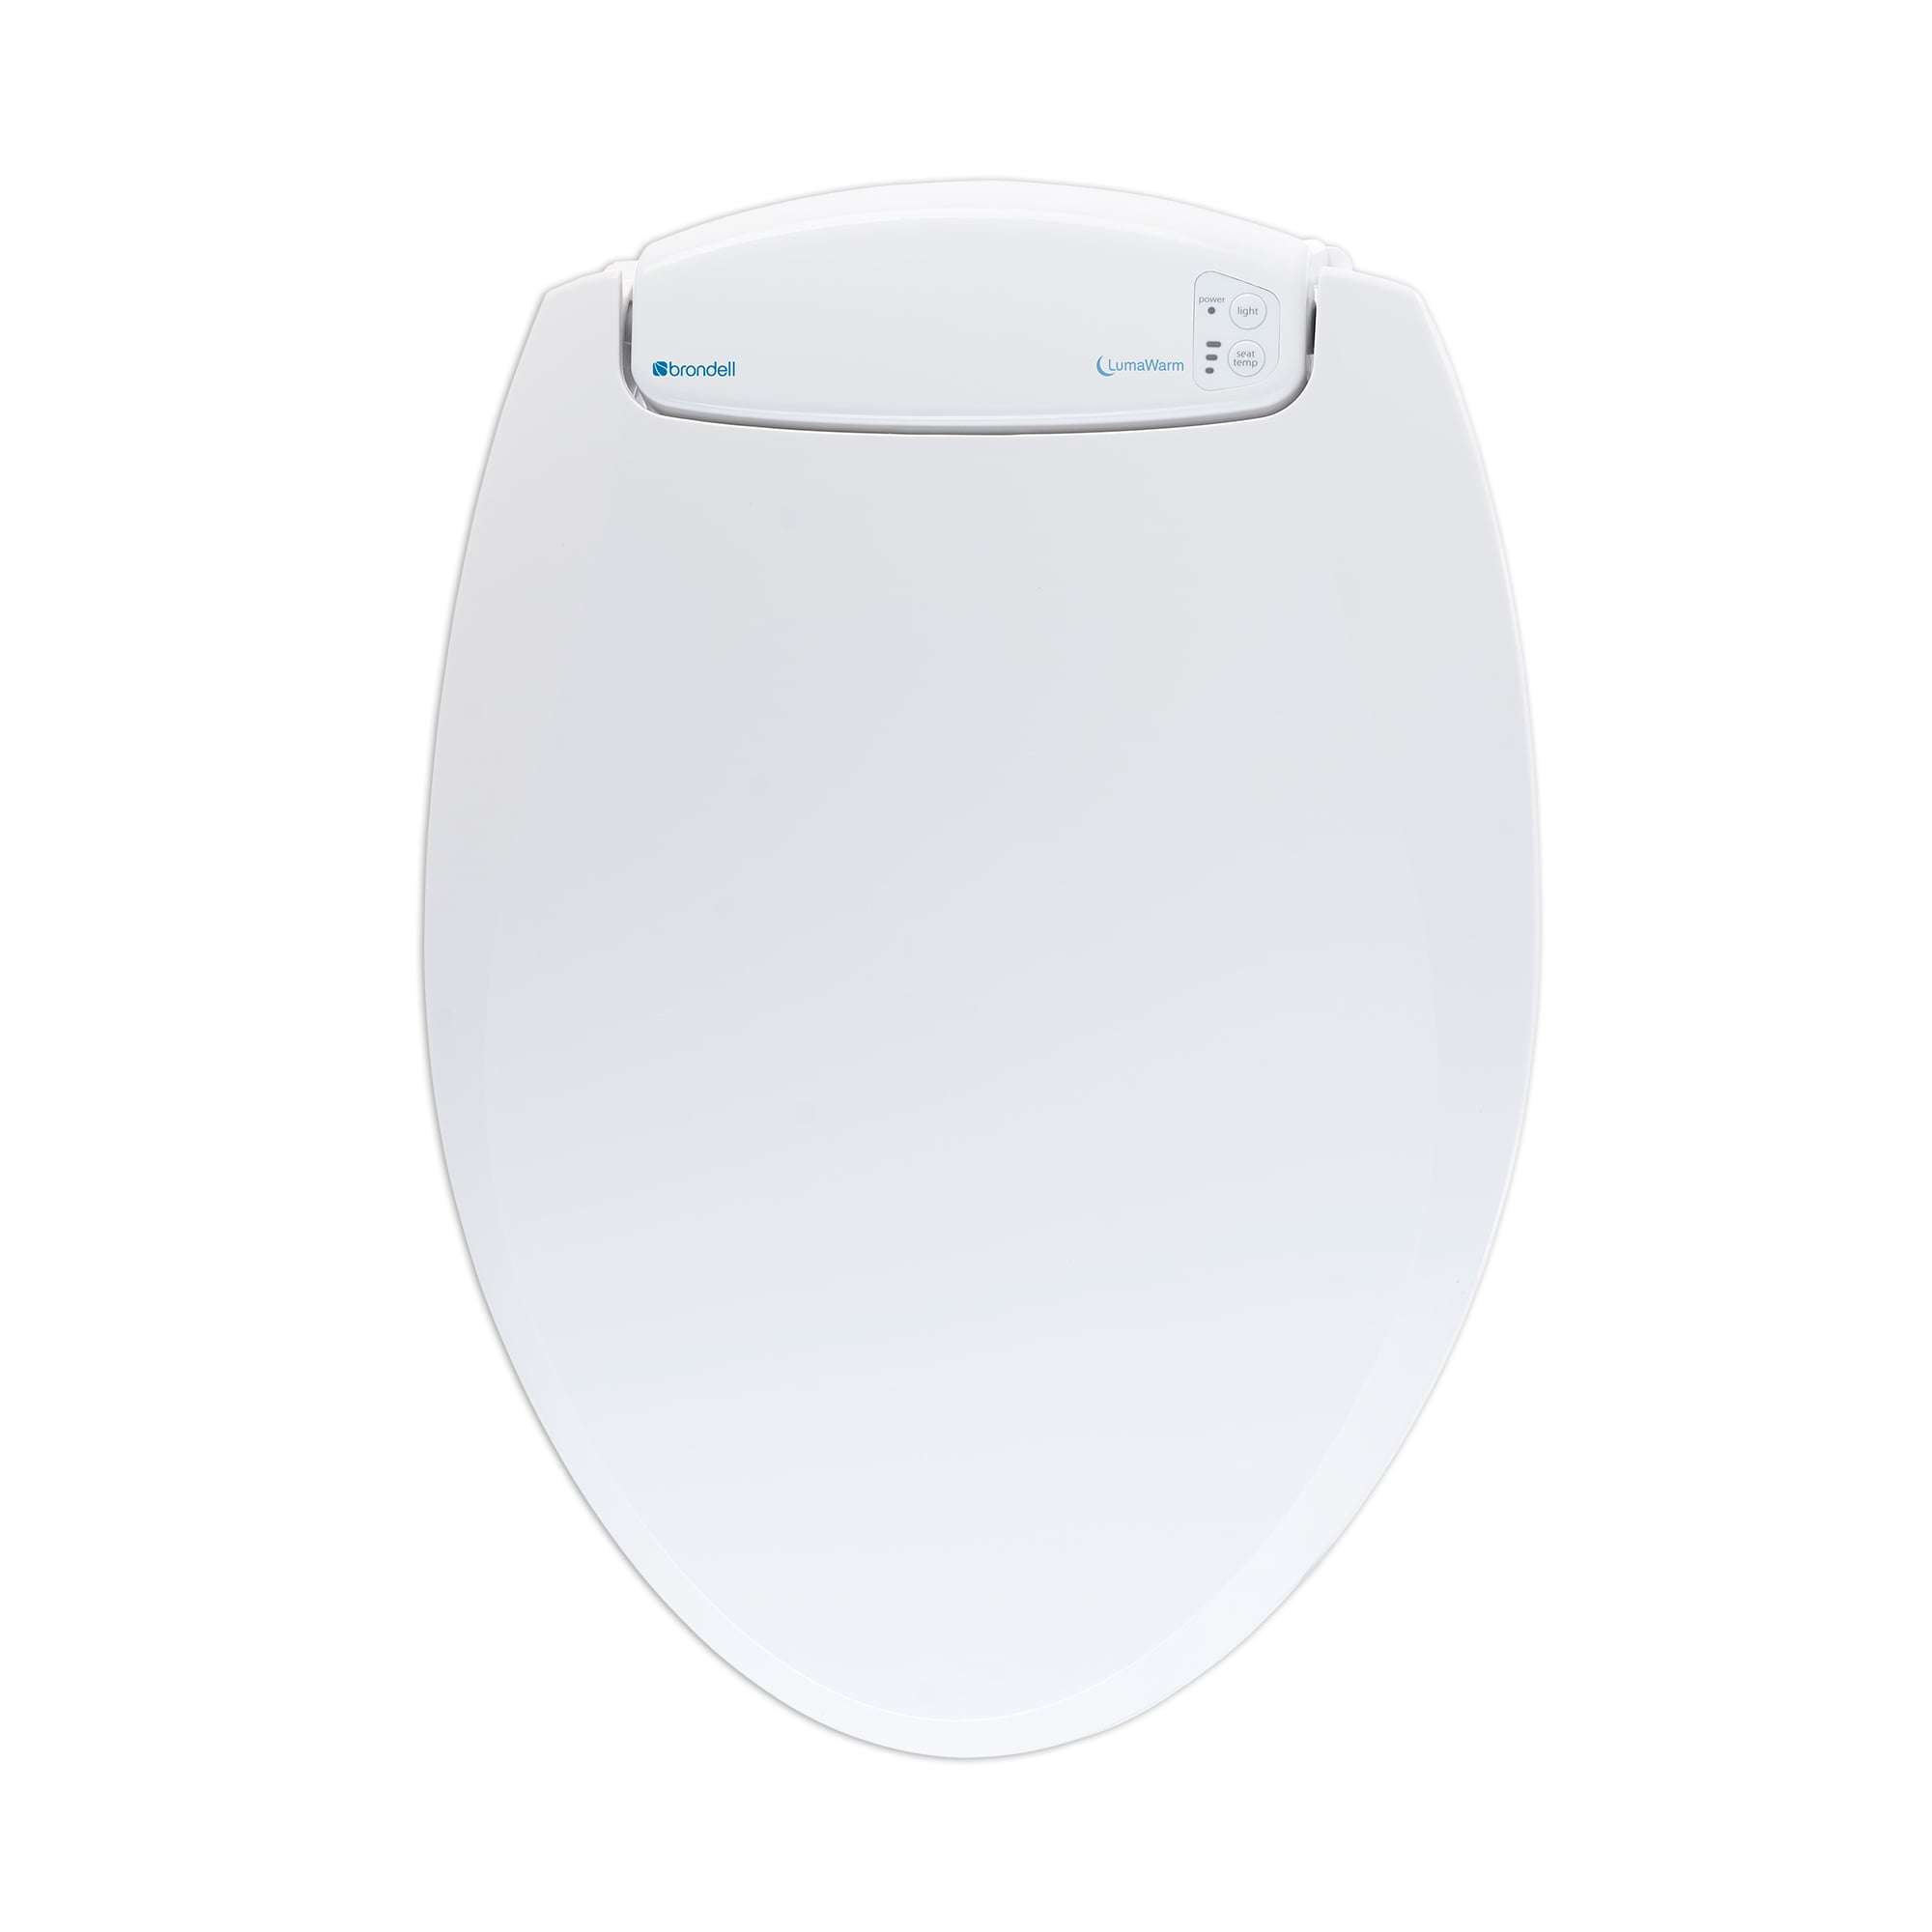 Toilet Seat Light  See Your Light Switch Easily At Night